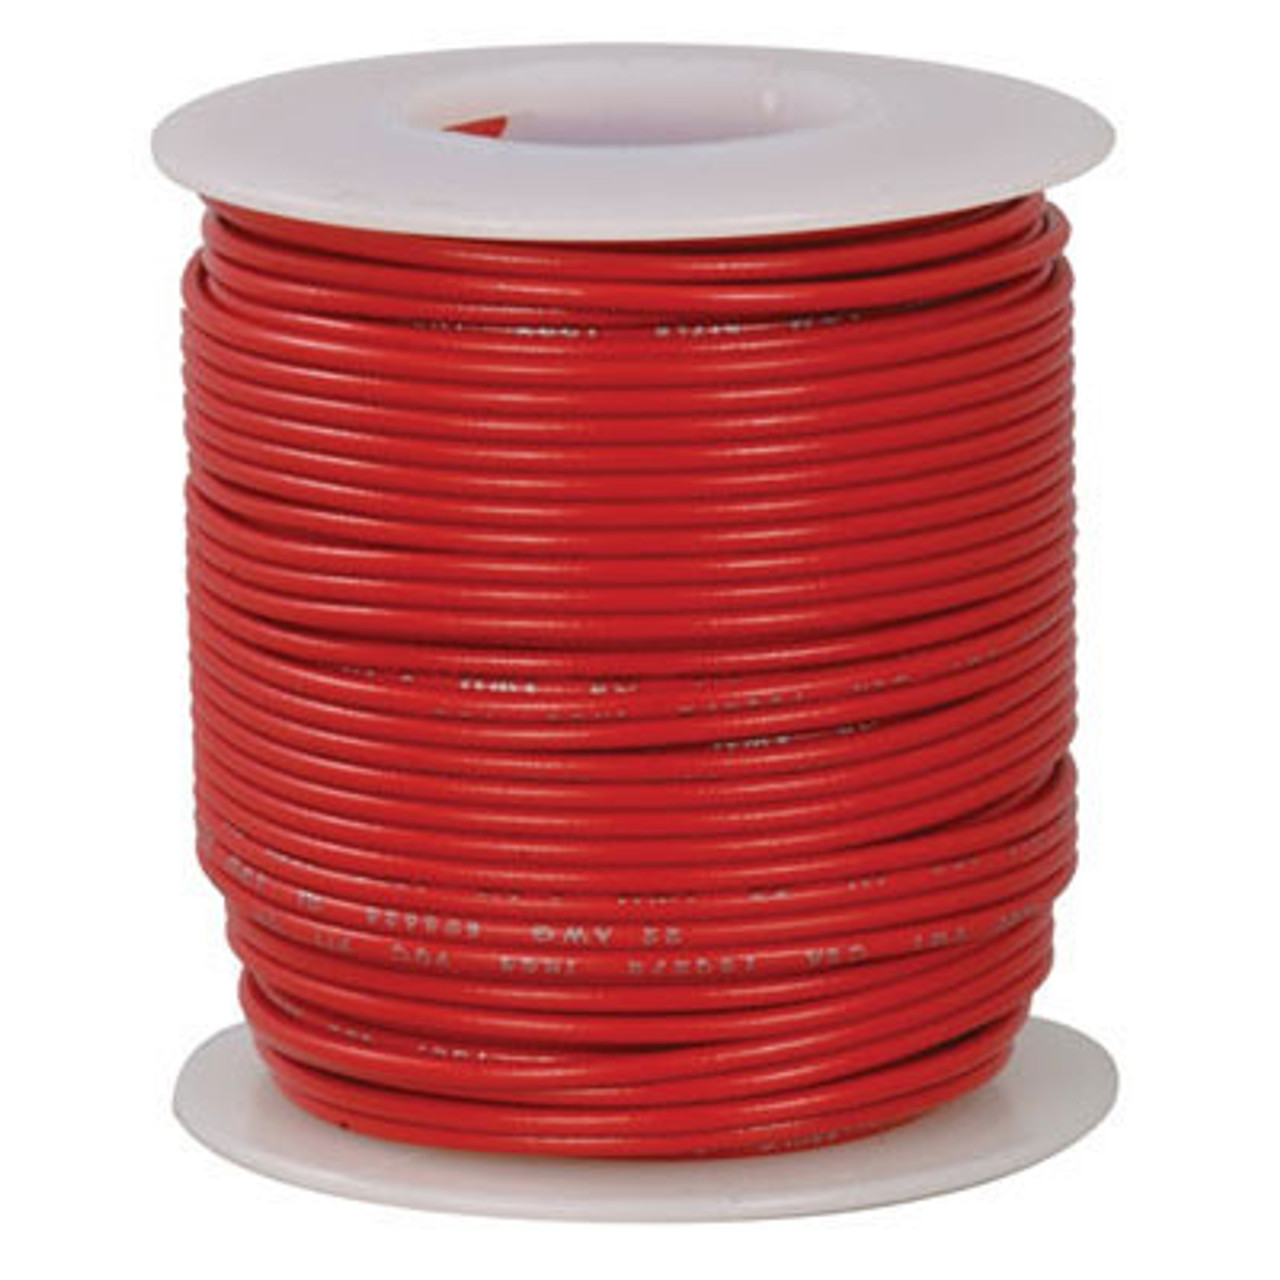 5 Roll 18 AWG Stranded Wire Spool-Flexible 18 Gauge Silicone Hook